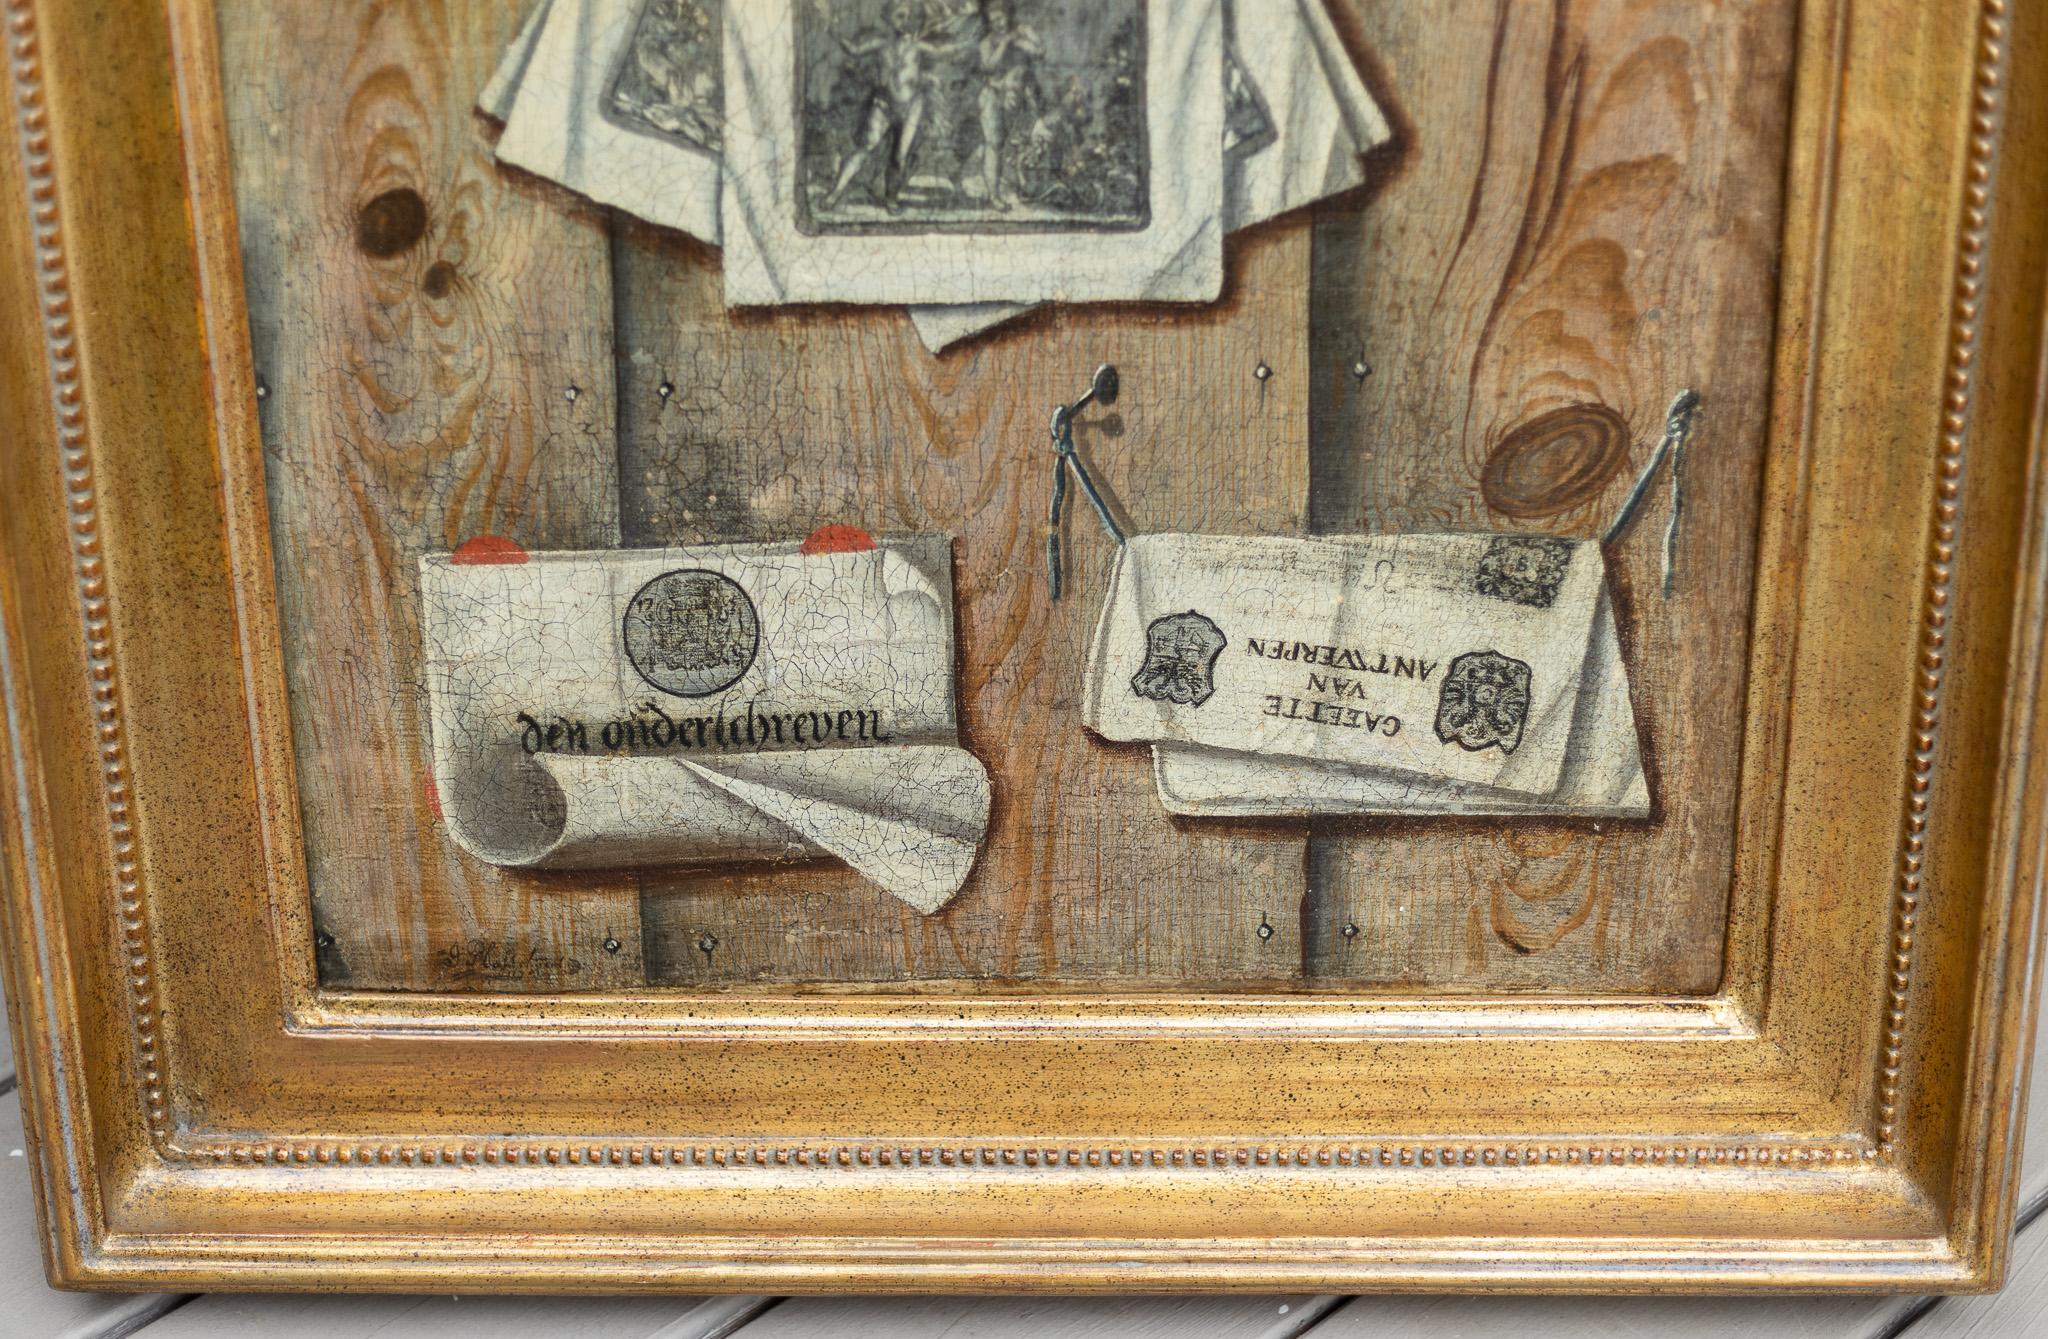 This historical painting by Plasschaert in his classic trompe l'oeil style portrays documents and printed items on a wooden wall. This painting was created in 1741, making it 281 years old. It's framed in a flattering gold painted wooden 28